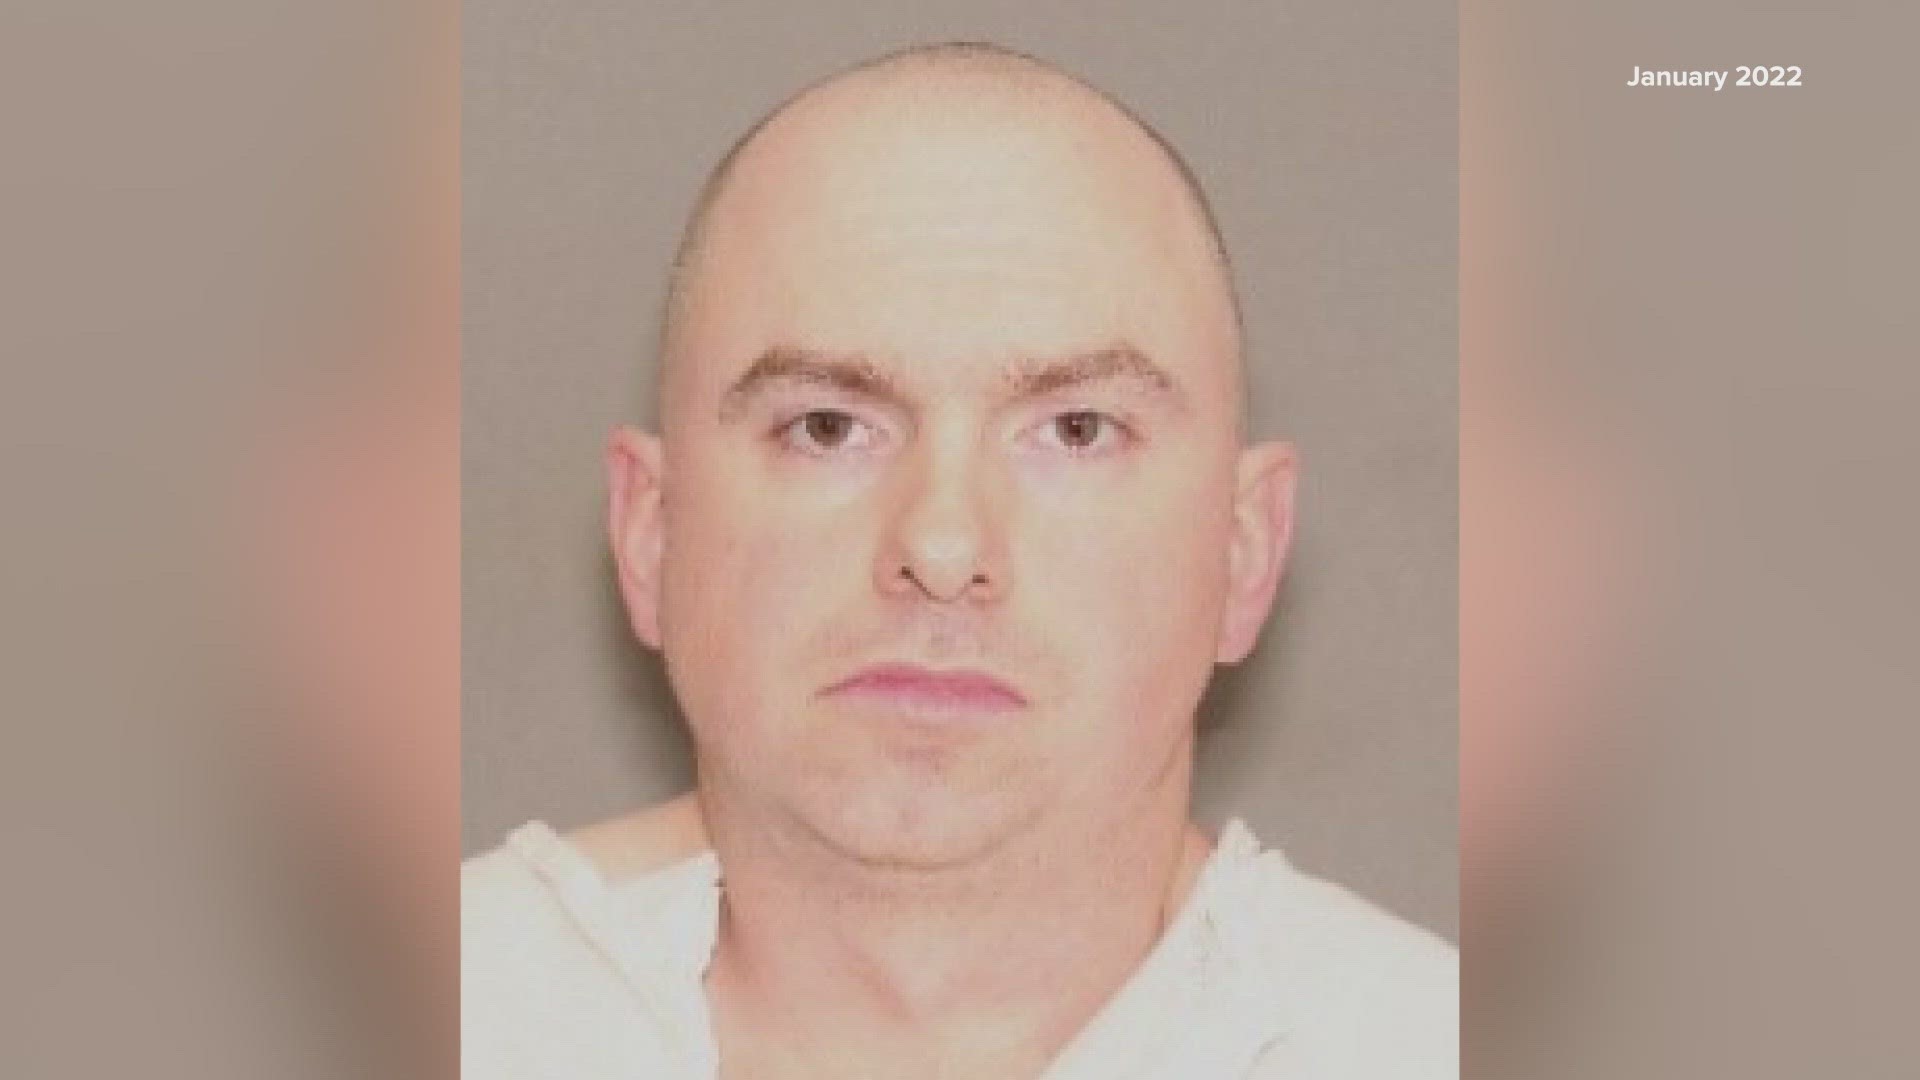 According to court records, the former Fort Worth police officer's appeal hearing is set for December 5.